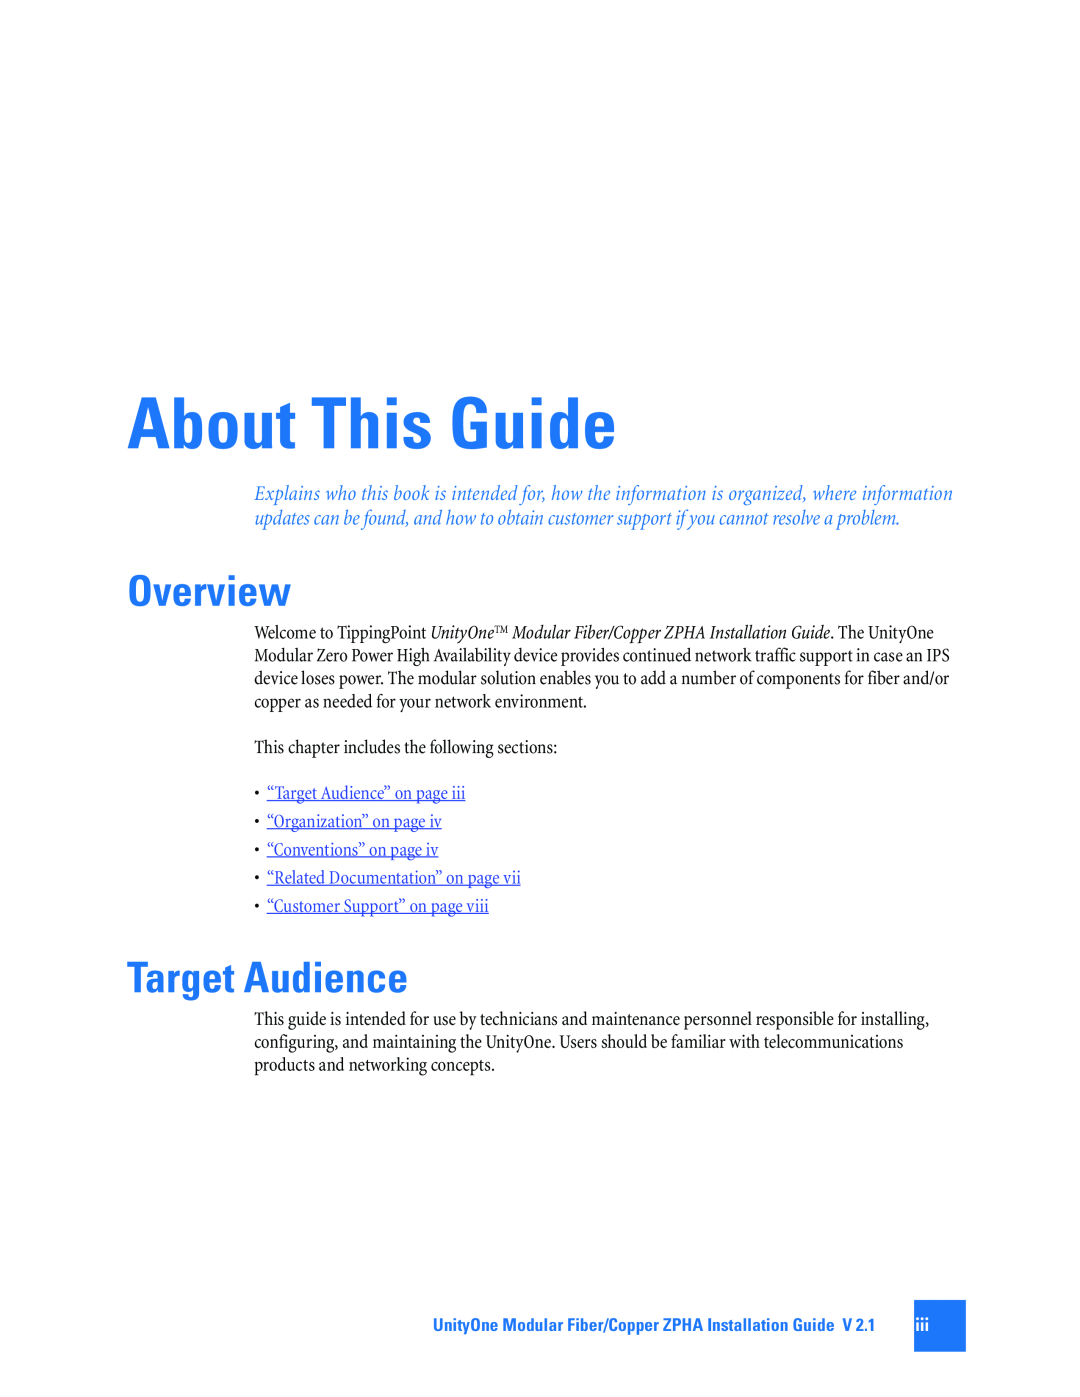 3Com TECHD-0000000050 manual About This Guide, Overview, “Target Audience” on page “Organization” on page 